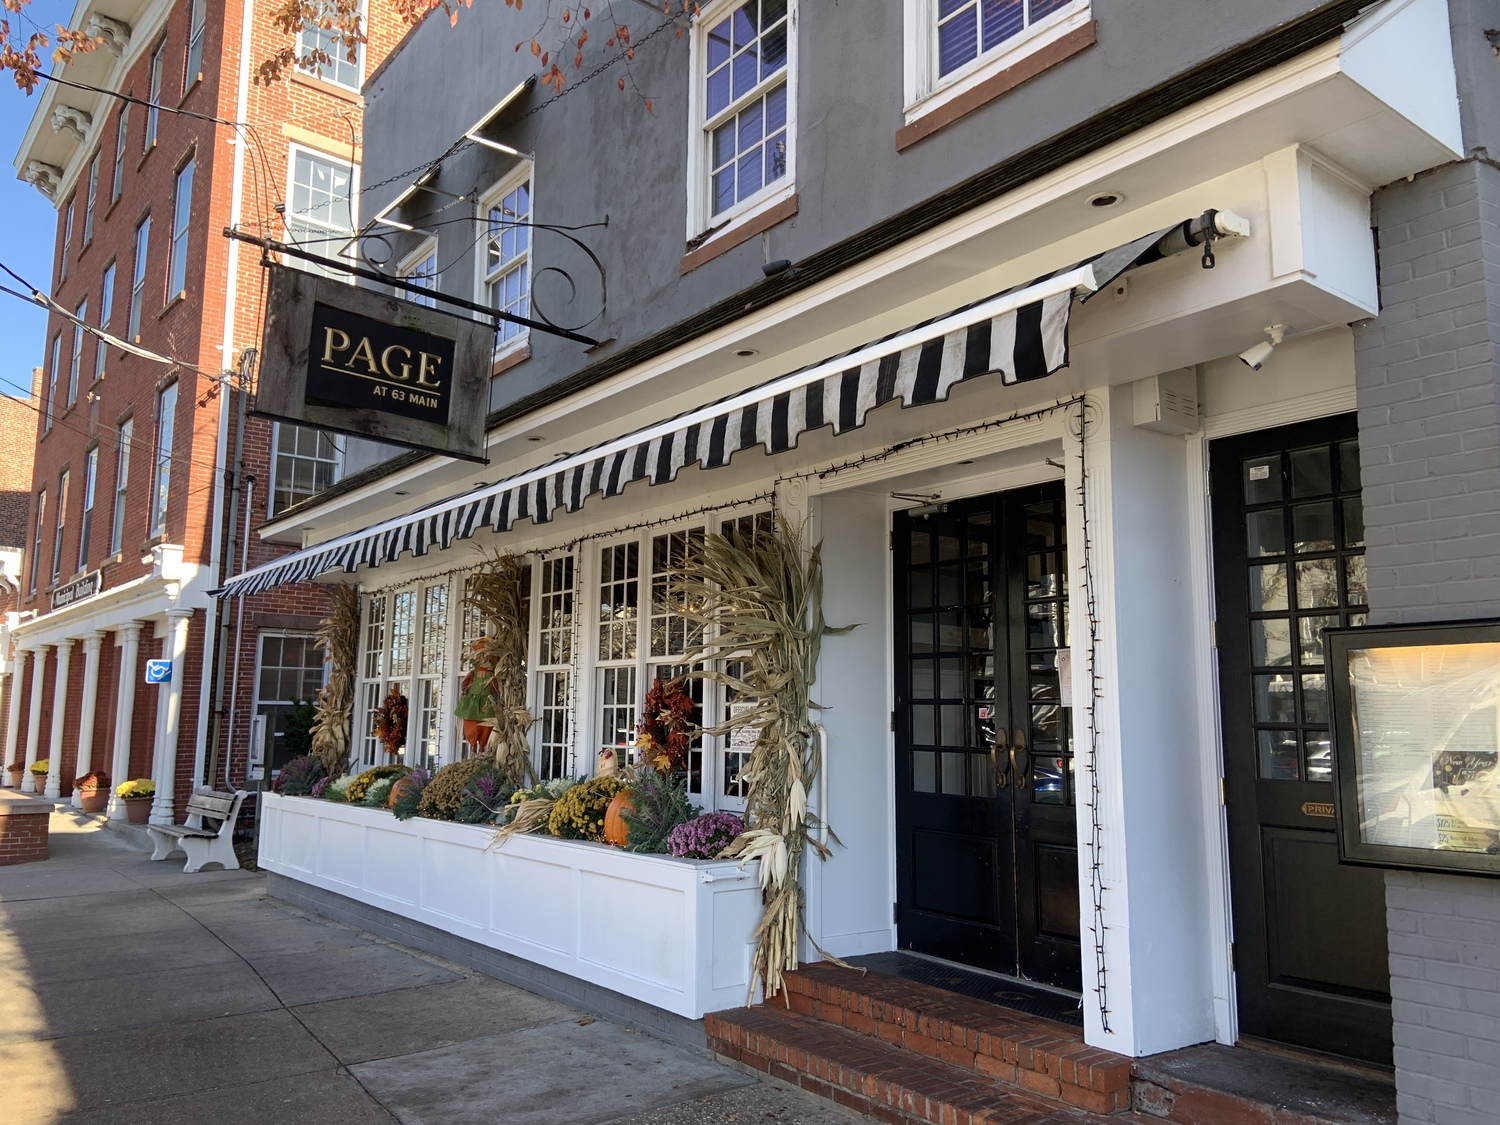 Page at 63 Main in Sag Harbor wants to expand dining to its second floor. STEPHEN J. KOTZ